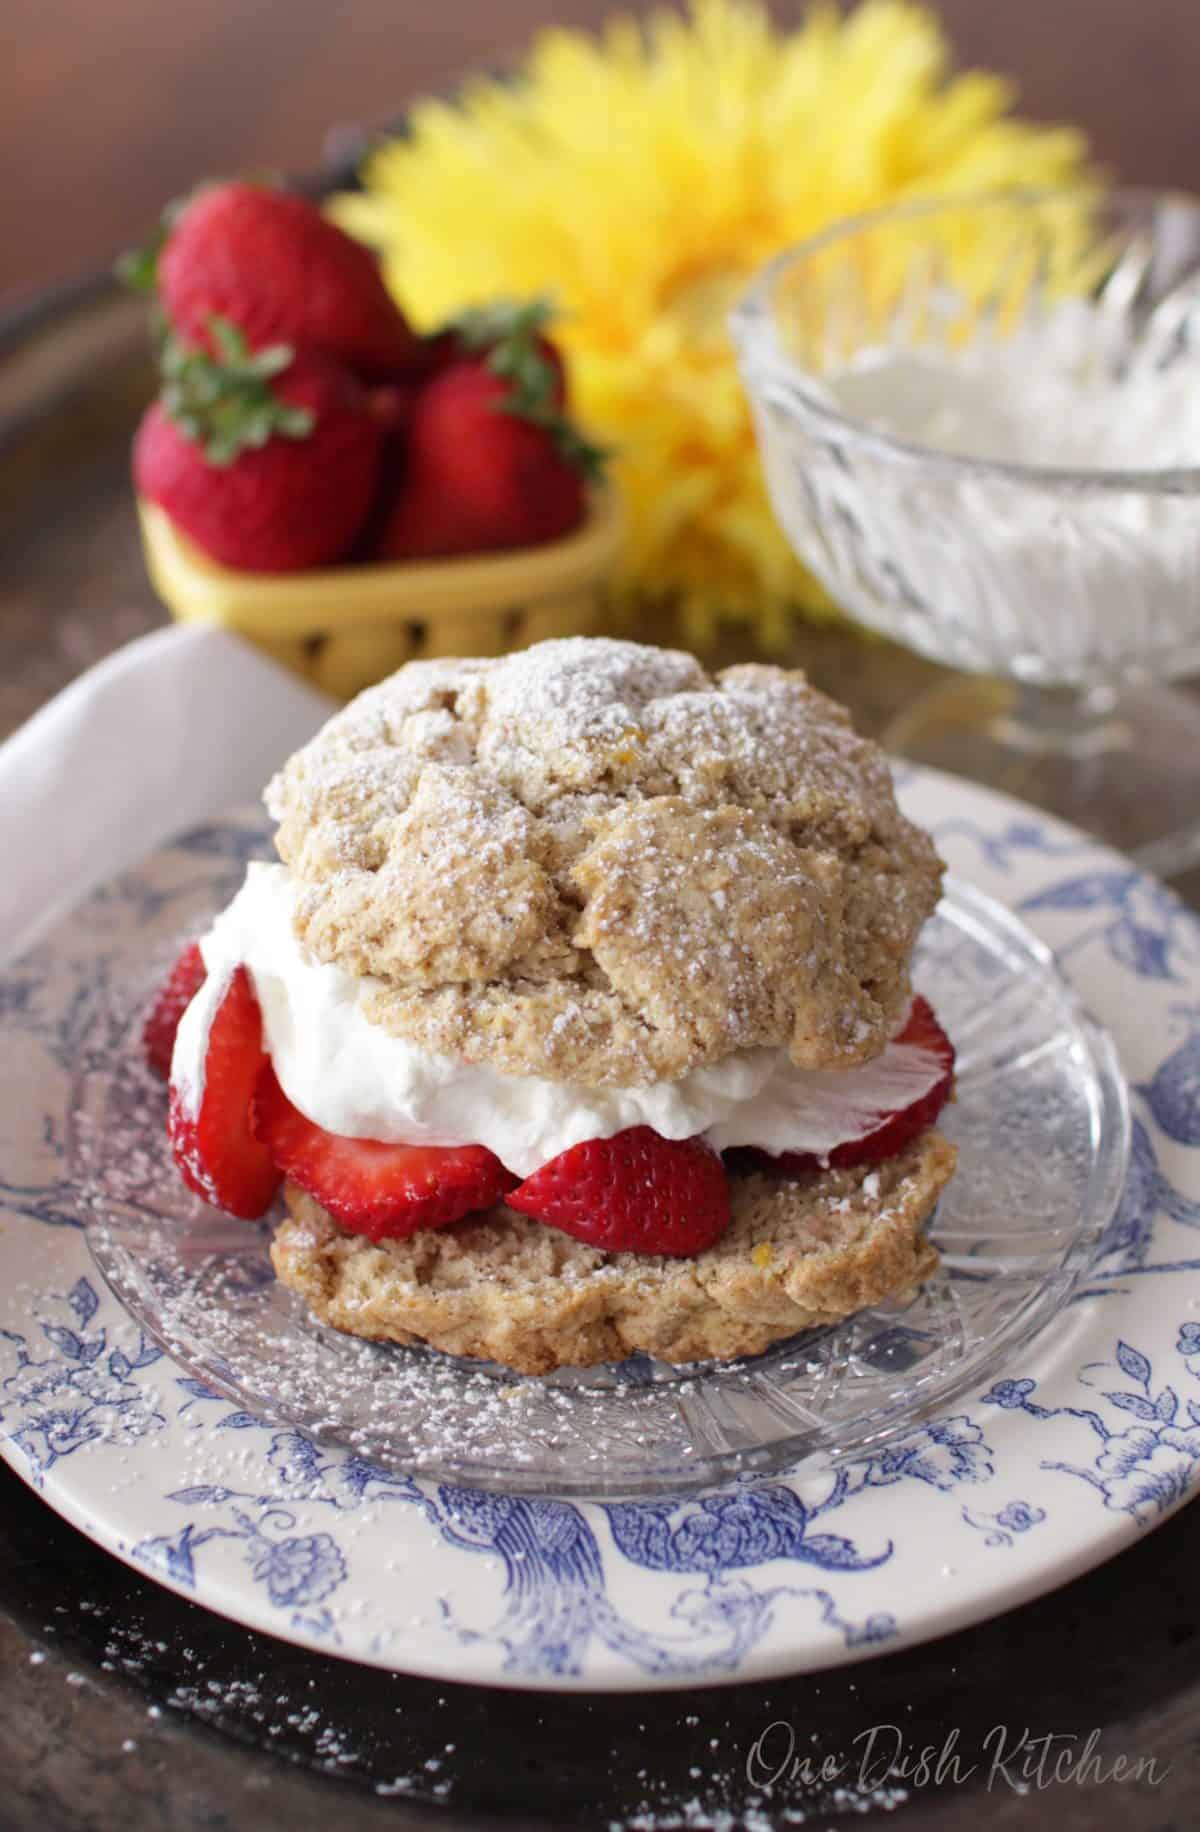 A strawberry shortcake filled with whipped cream and strawberries and dusted with powdered sugar on a plate with a bowl of whipped cream and a bowl of strawberries in the background.